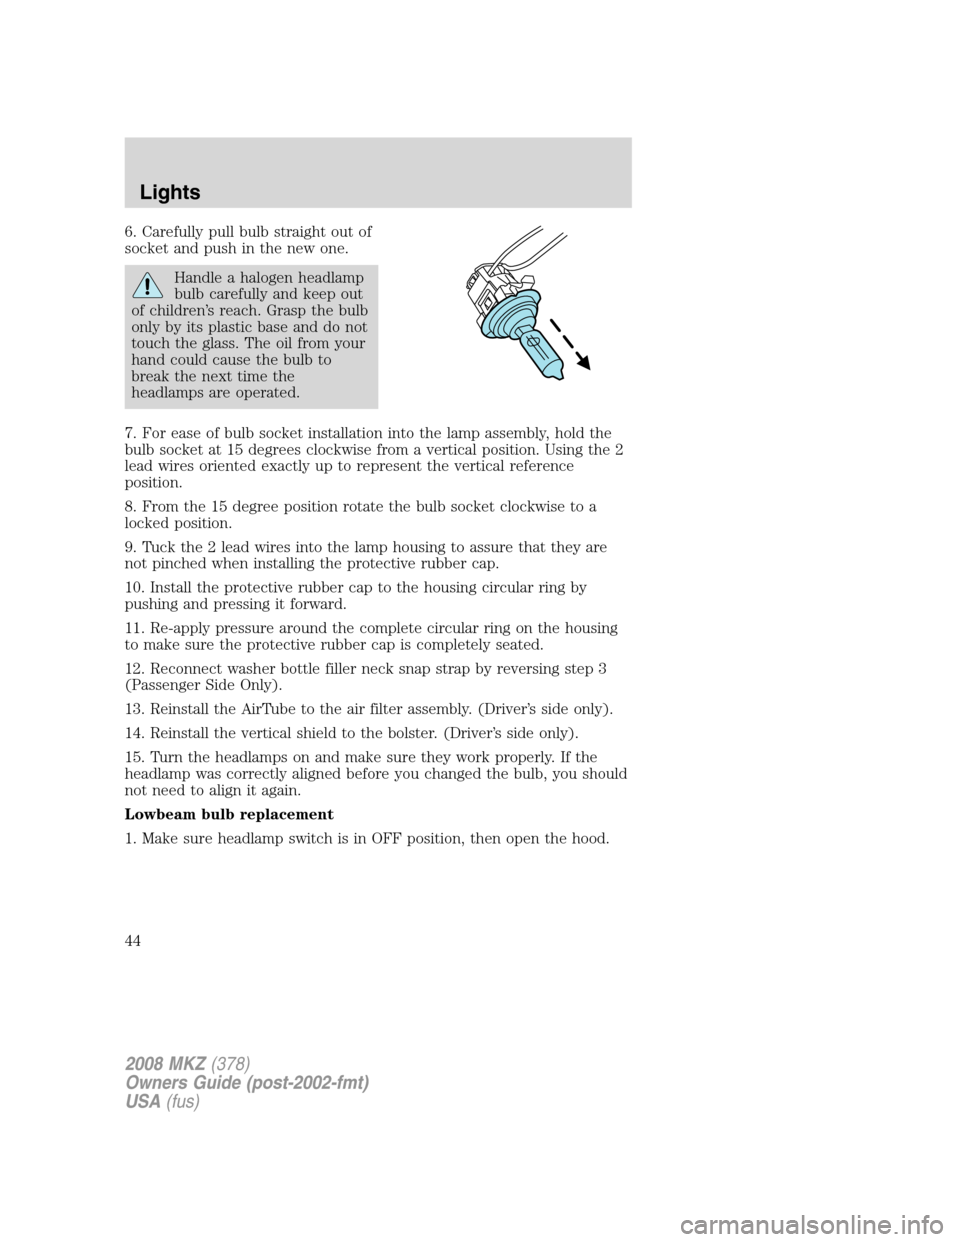 LINCOLN MKZ 2008  Owners Manual 6. Carefully pull bulb straight out of
socket and push in the new one.
Handle a halogen headlamp
bulb carefully and keep out
of children’s reach. Grasp the bulb
only by its plastic base and do not
t